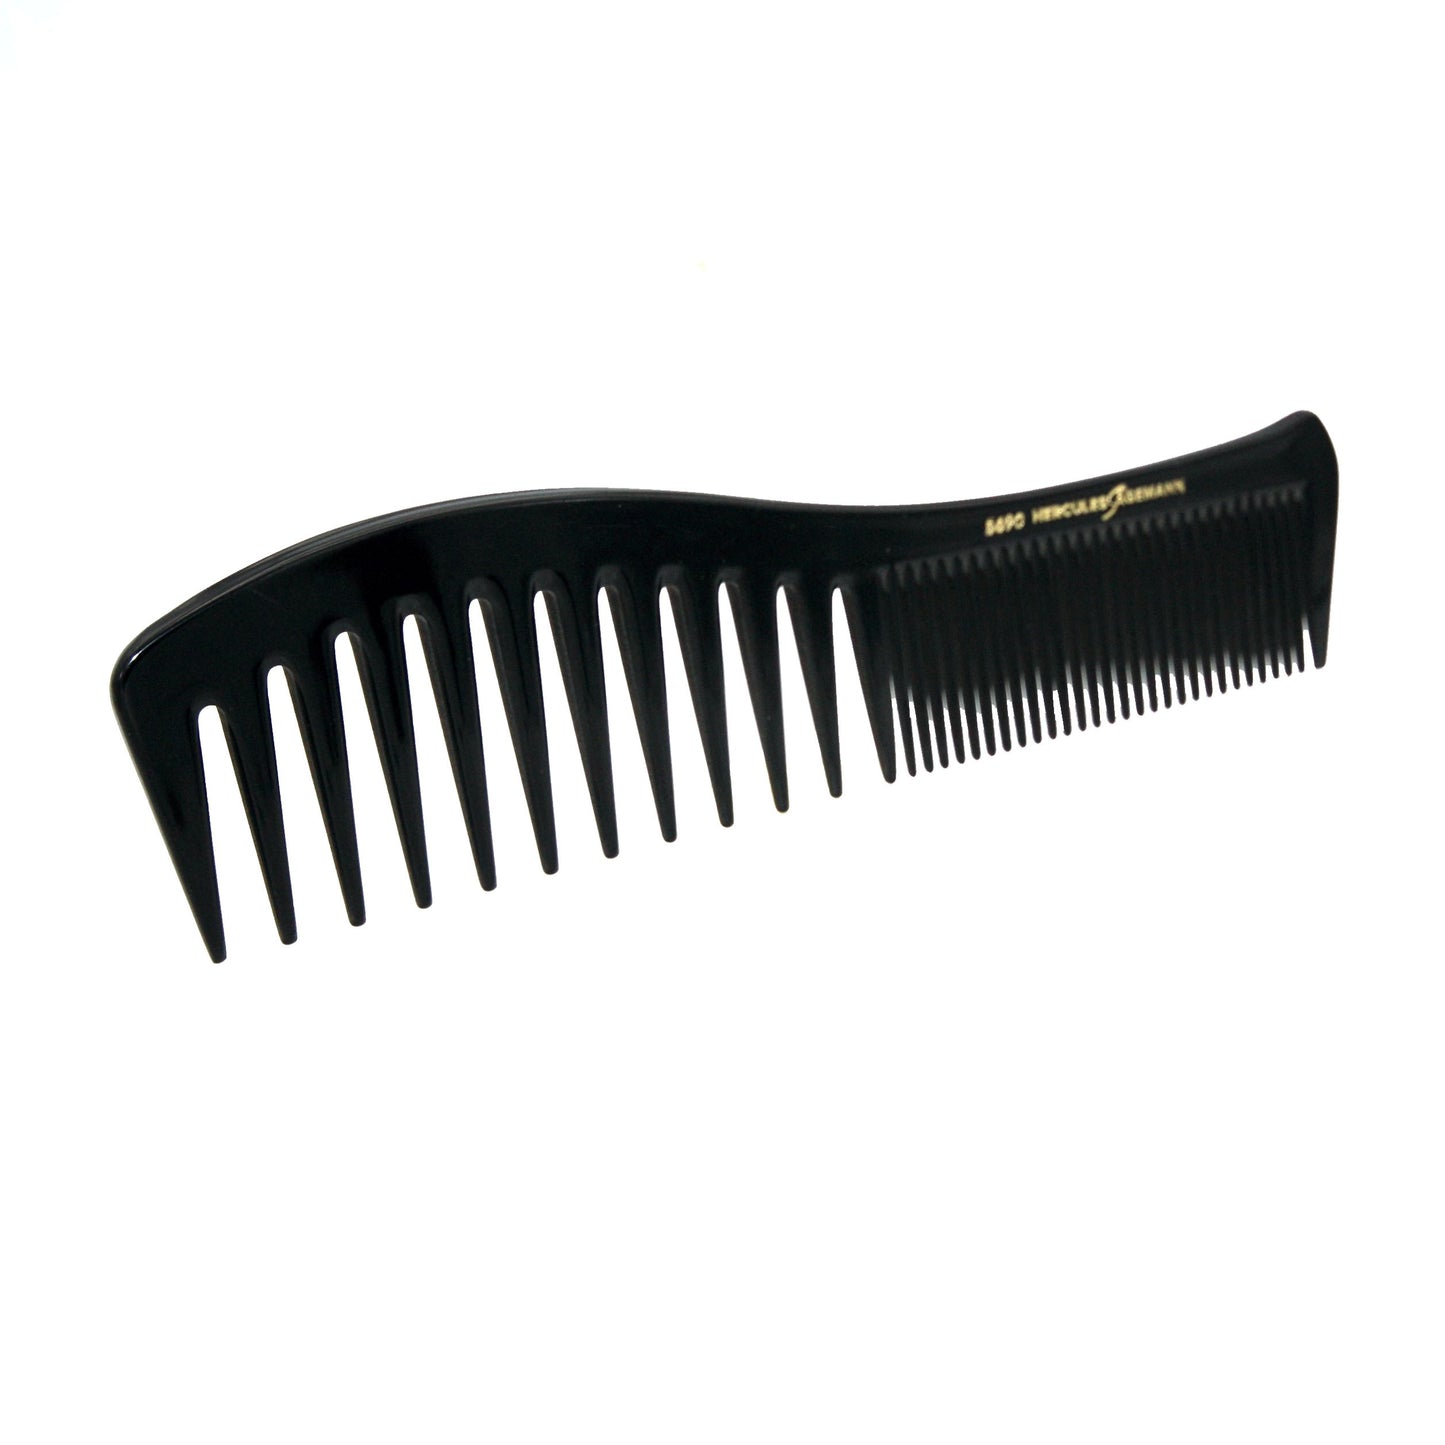 Hard Rubber, 7.75in Curved Styling Comb, Hercules Sagemann 5690